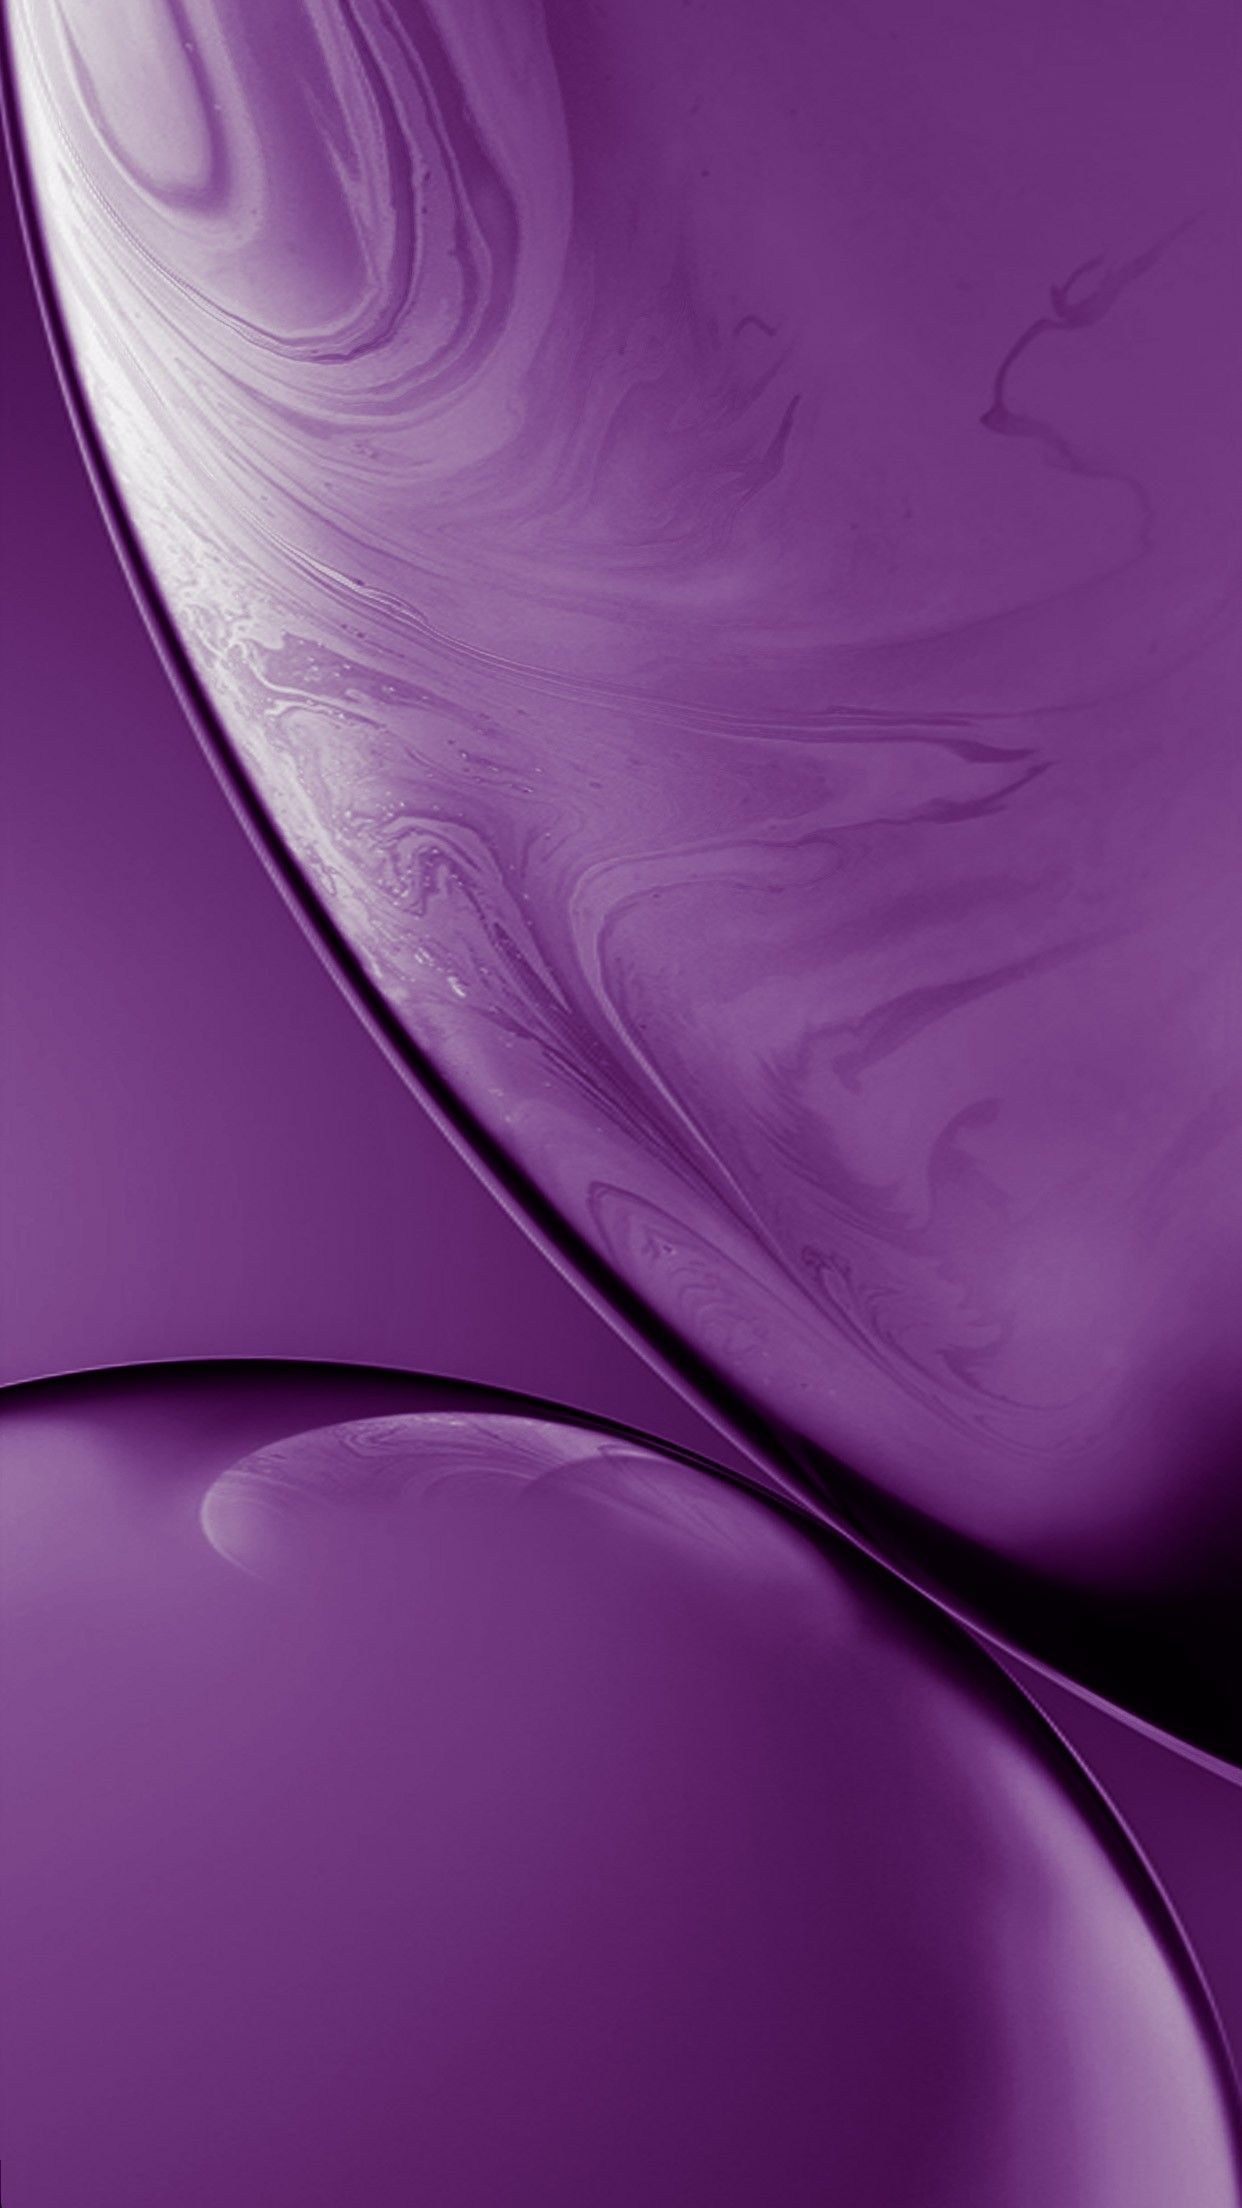 Aesthetic Purple iPhone Xr Wallpapers - Wallpaper Cave